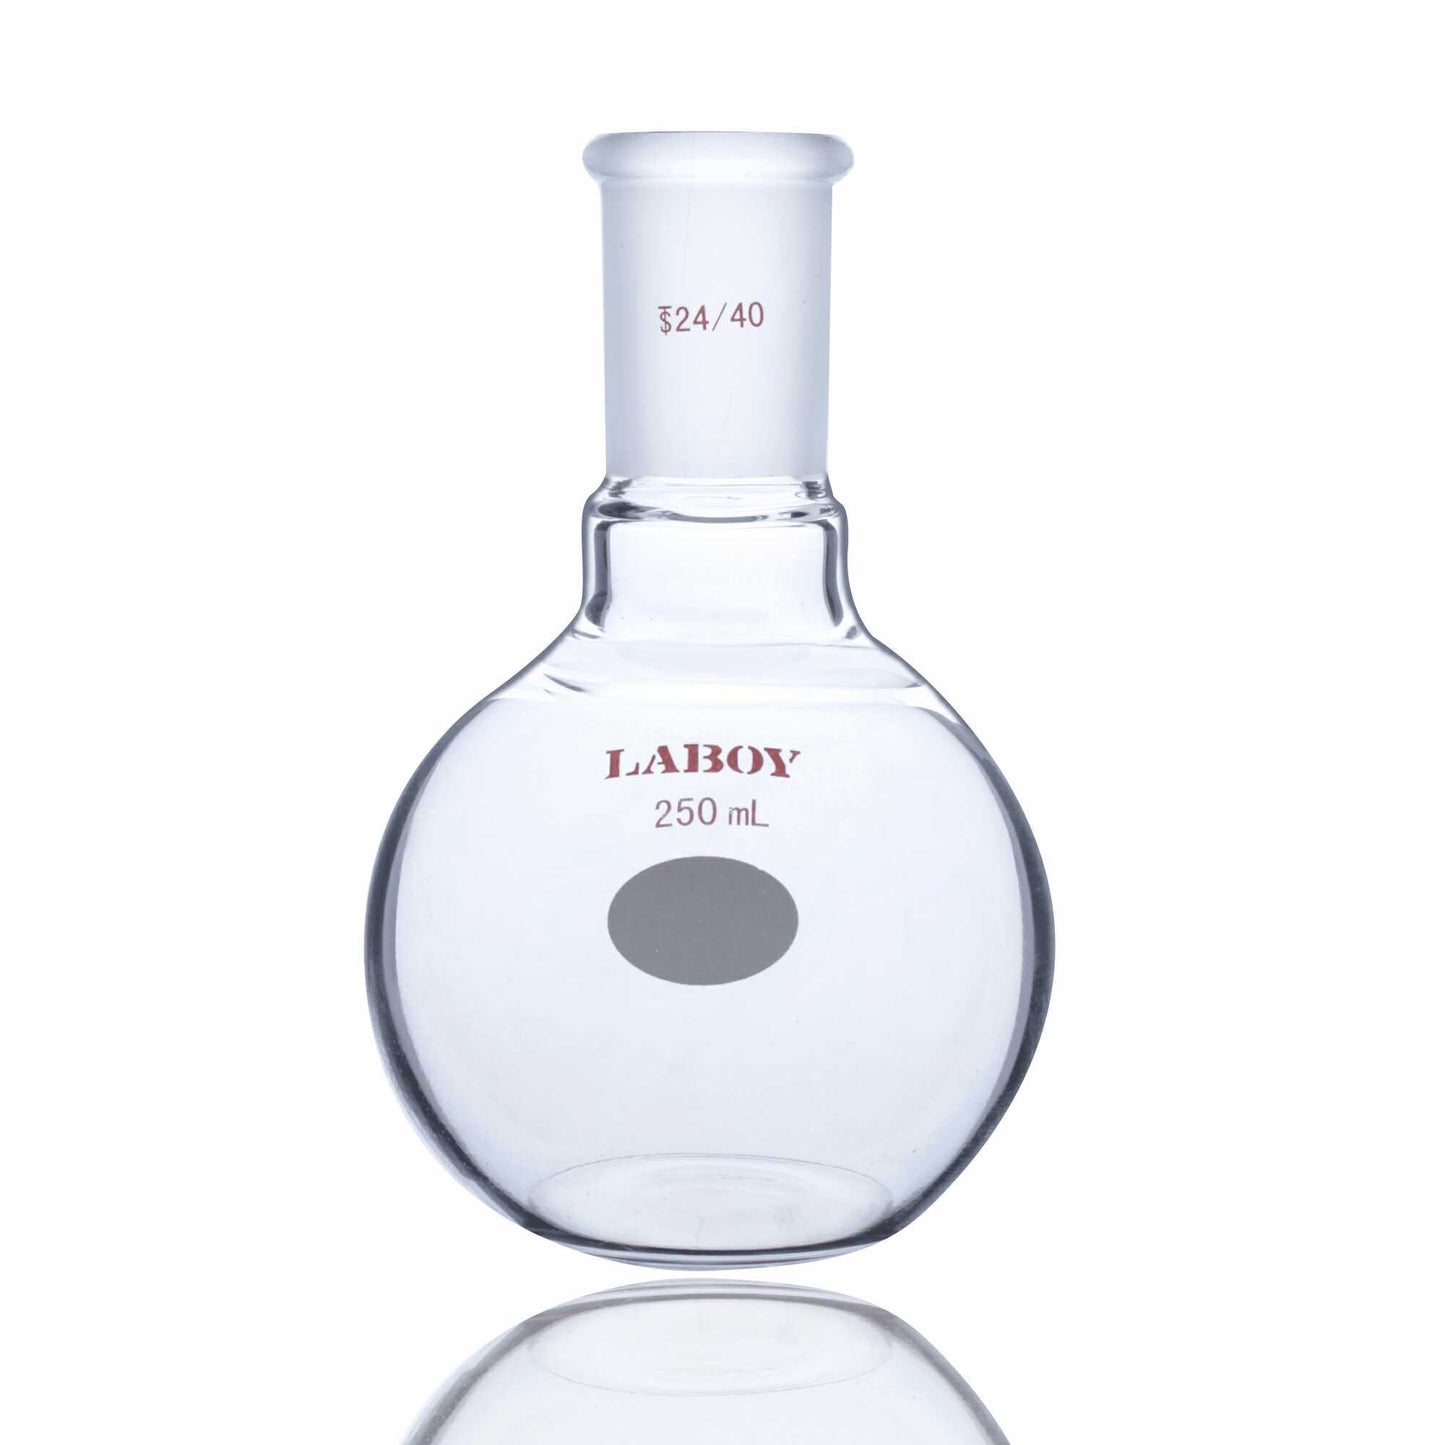 Glass Flat Bottom Boiling Flask Single Neck With Standard Taper Joint - Scienmart